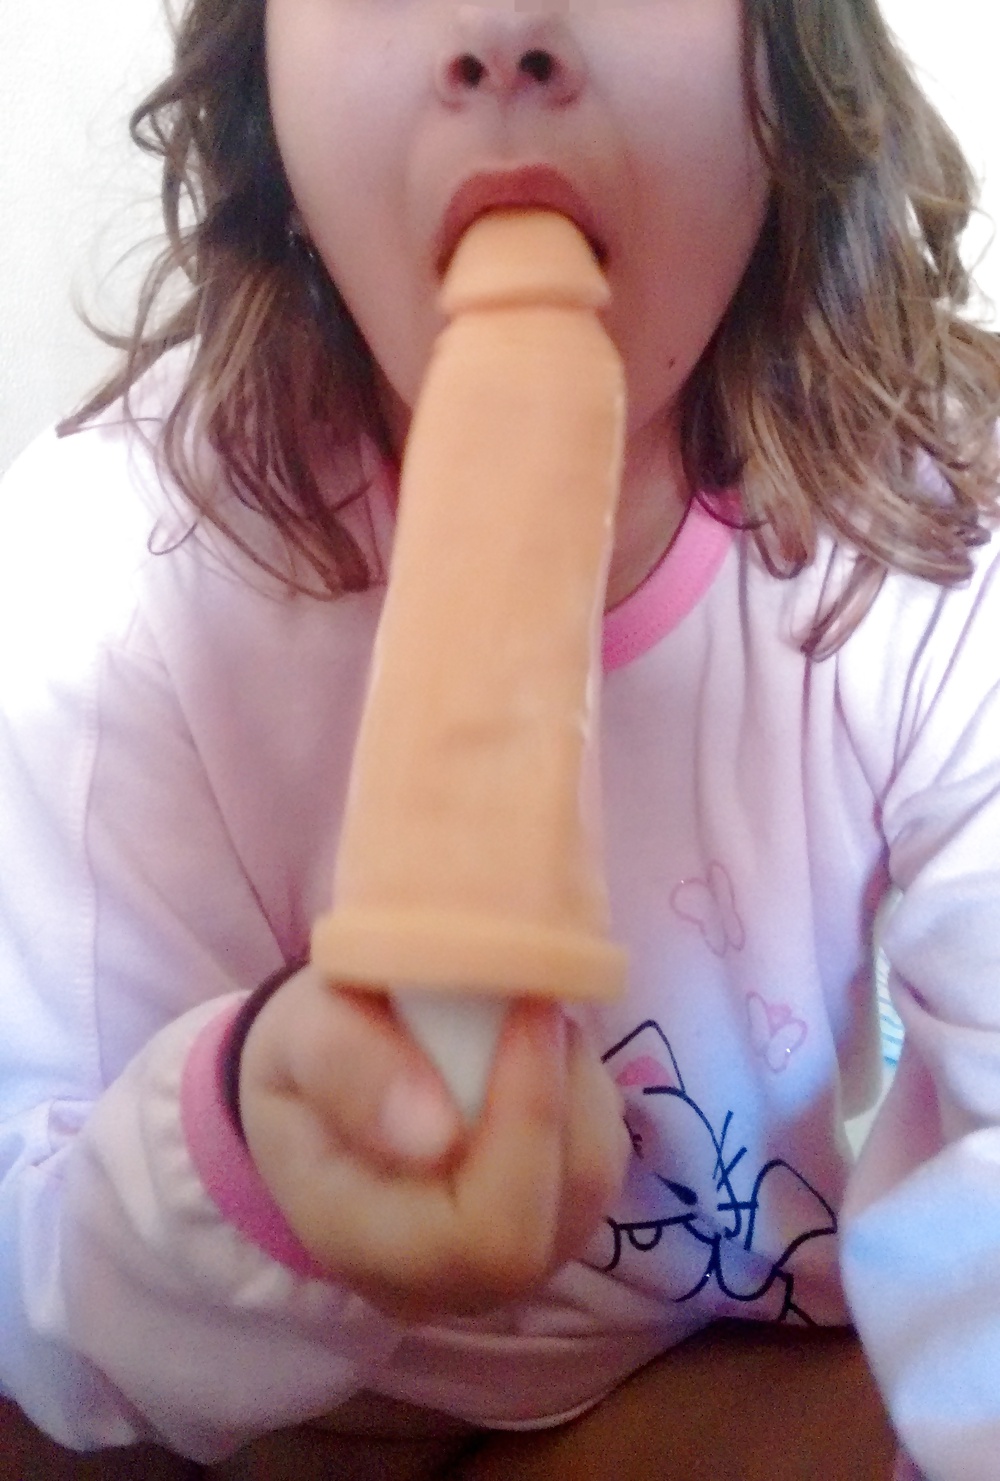 She loves her new big dildo adult photos